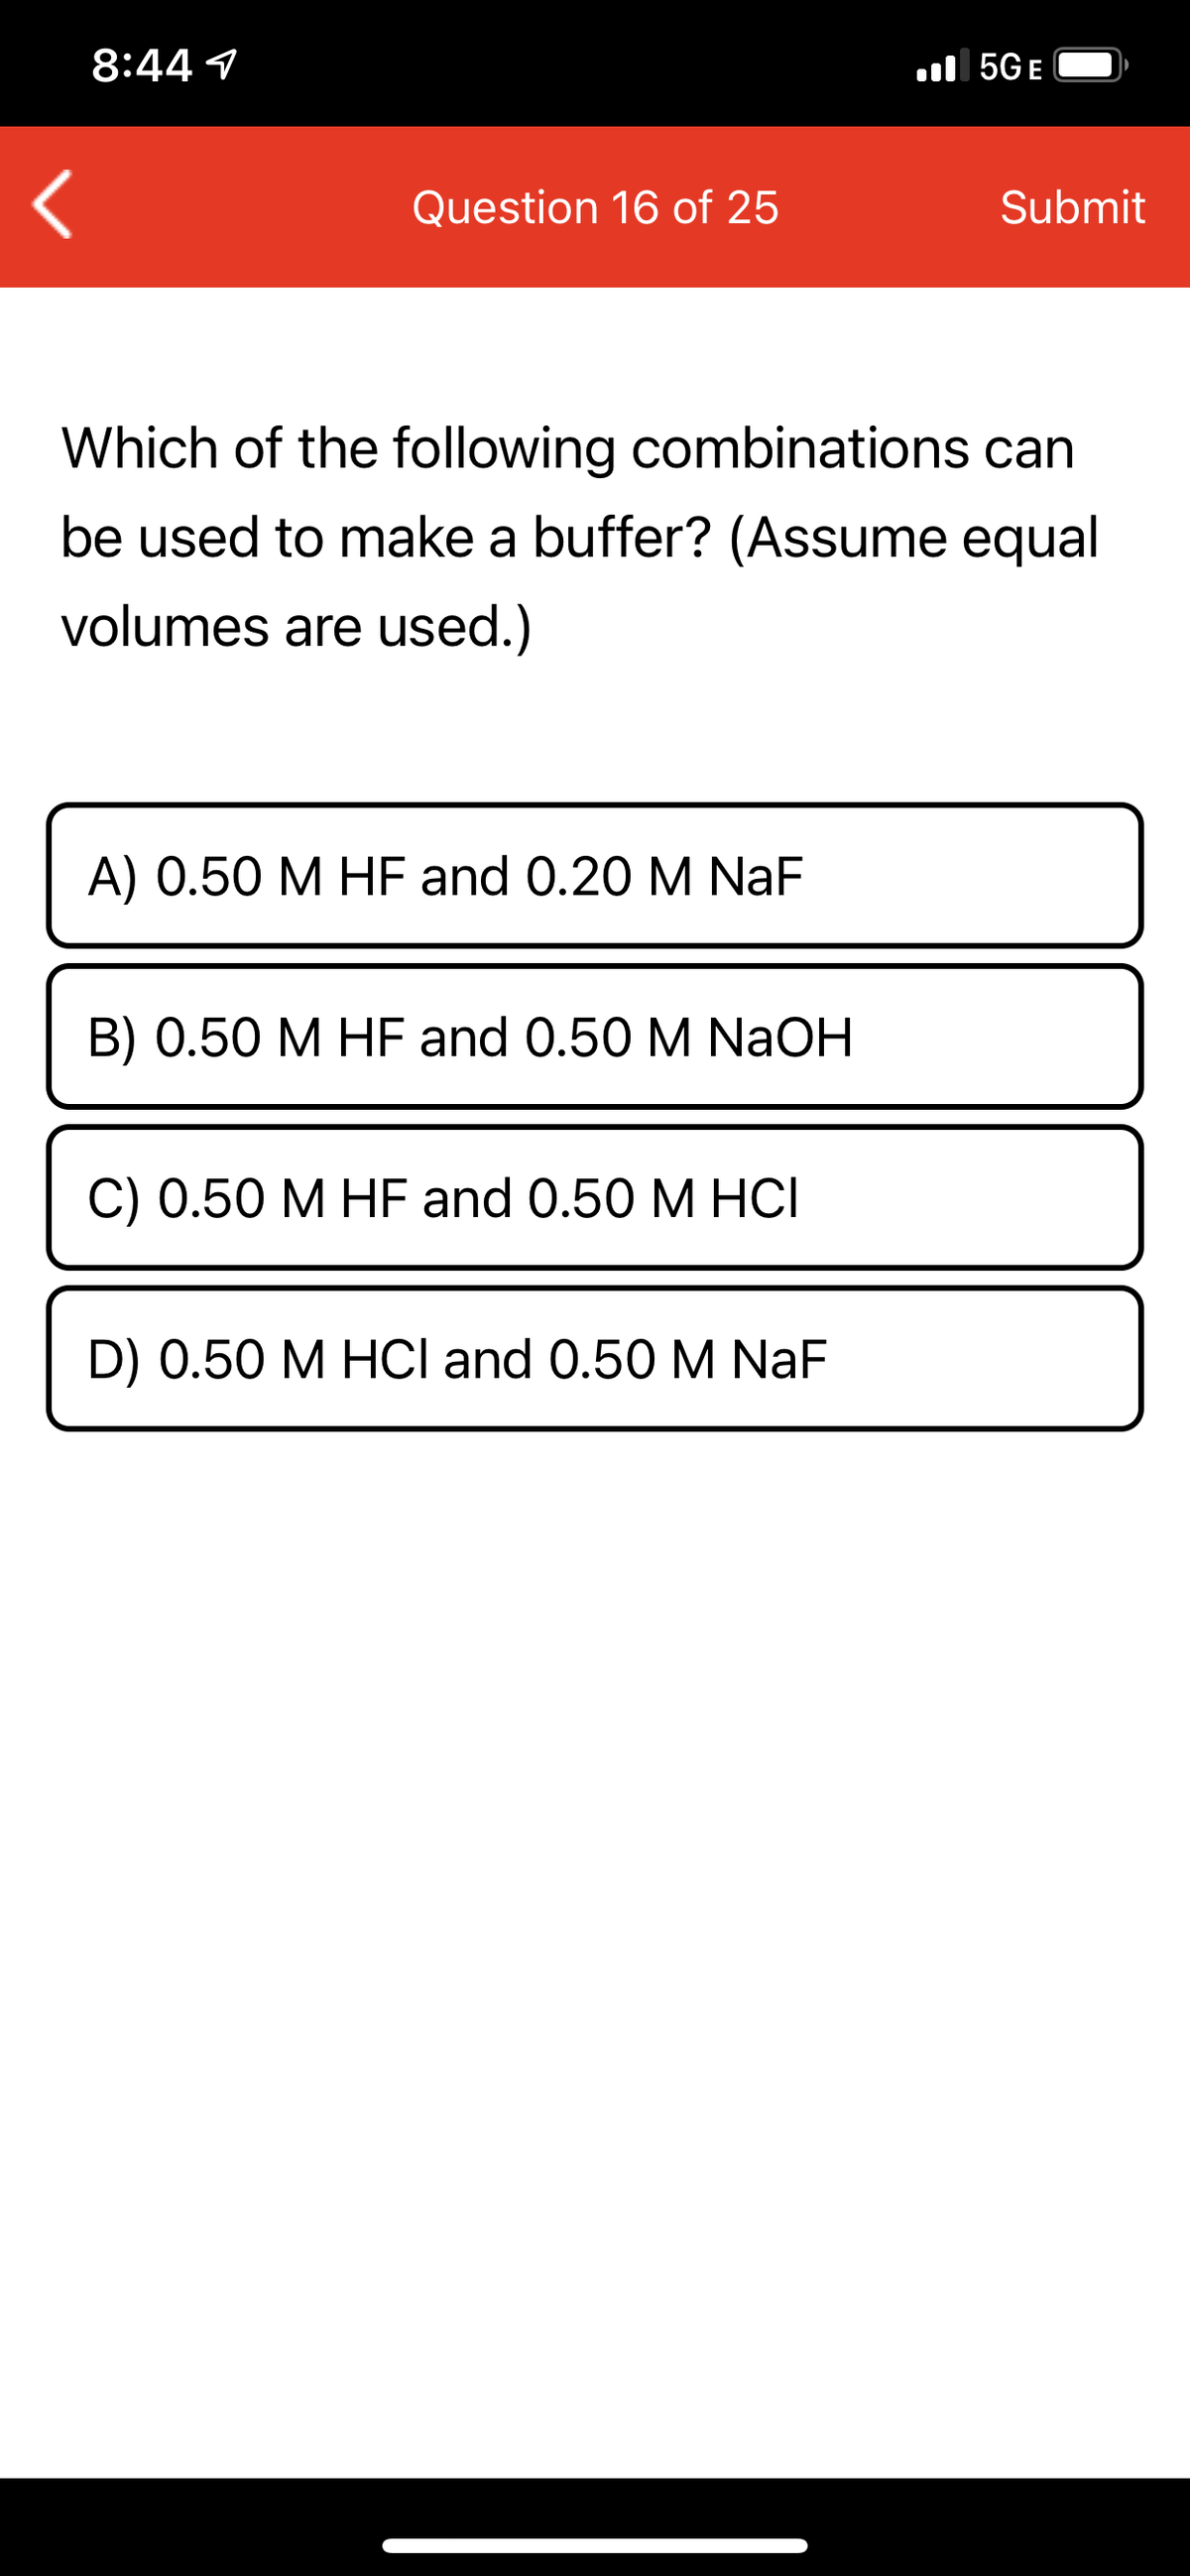 8:44 1
ll 5GE
Question 16 of 25
Submit
Which of the following combinations can
be used to make a buffer? (Assume equal
volumes are used.)
A) 0.50 M HF and 0.20 M NaF
B) 0.50 M HF and 0.50 M NaOH
С) 0.50 М НF and O.50 M HСІ
D) 0.50 M HCI and 0.50 M NaF
